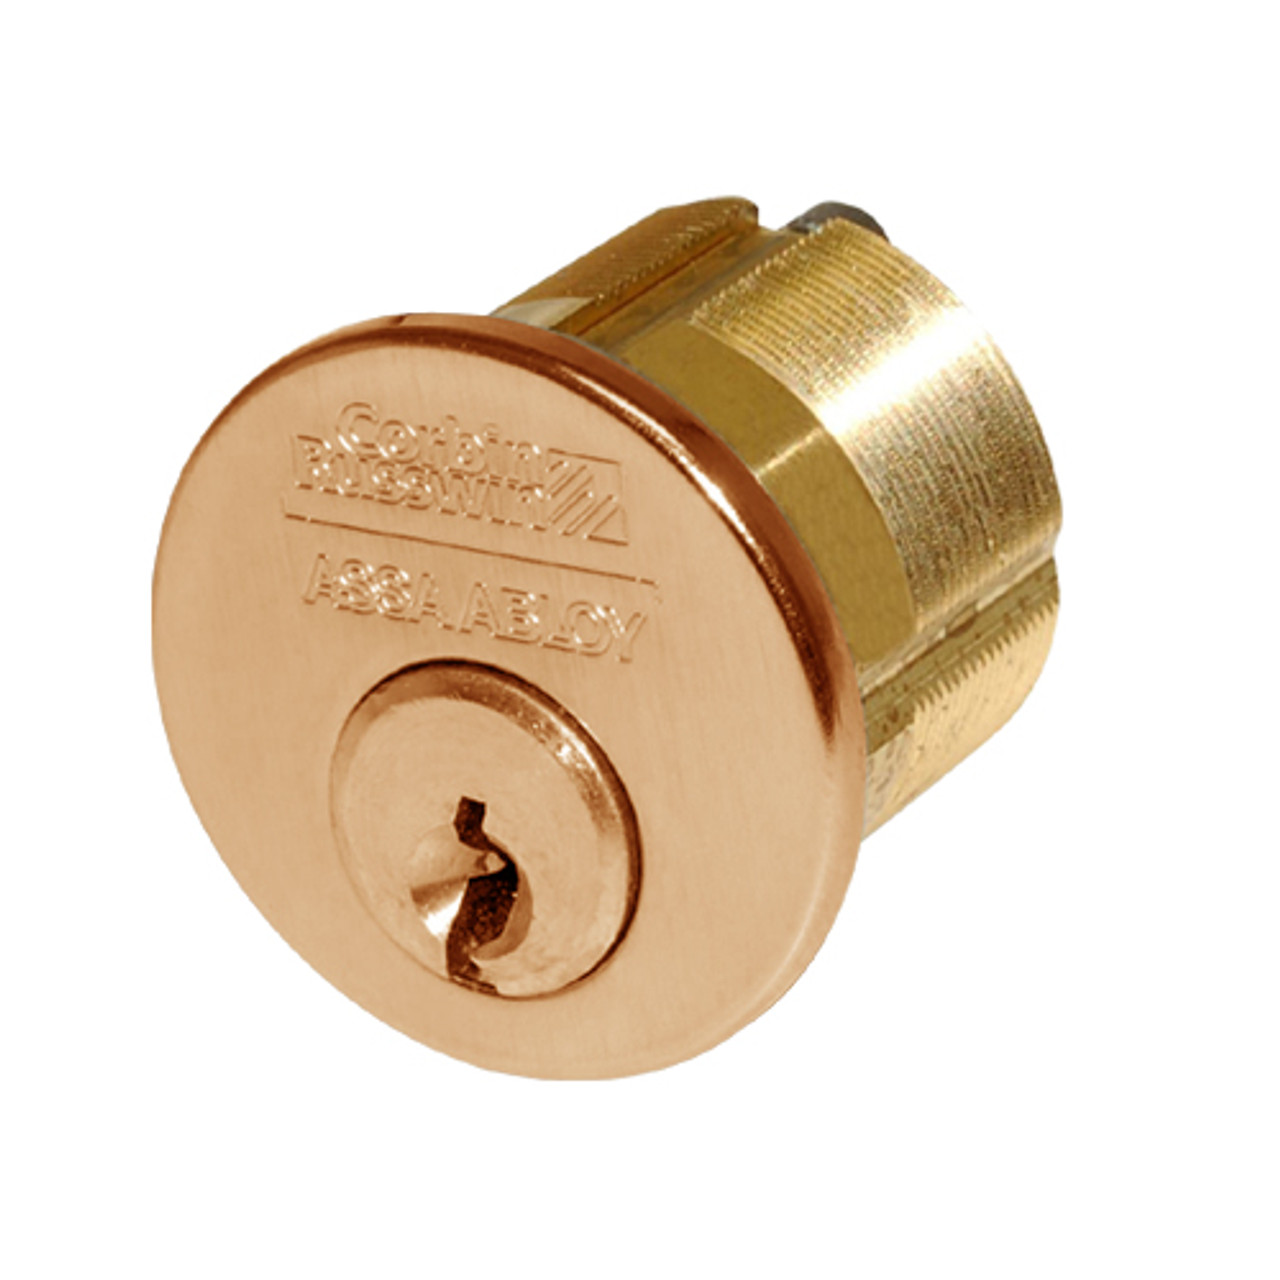 CR1000-118-A01-6-N7-612 Corbin Conventional Mortise Cylinder for Mortise Lock and DL3000 Deadlocks with Cloverleaf Cam in Satin Bronze Finish